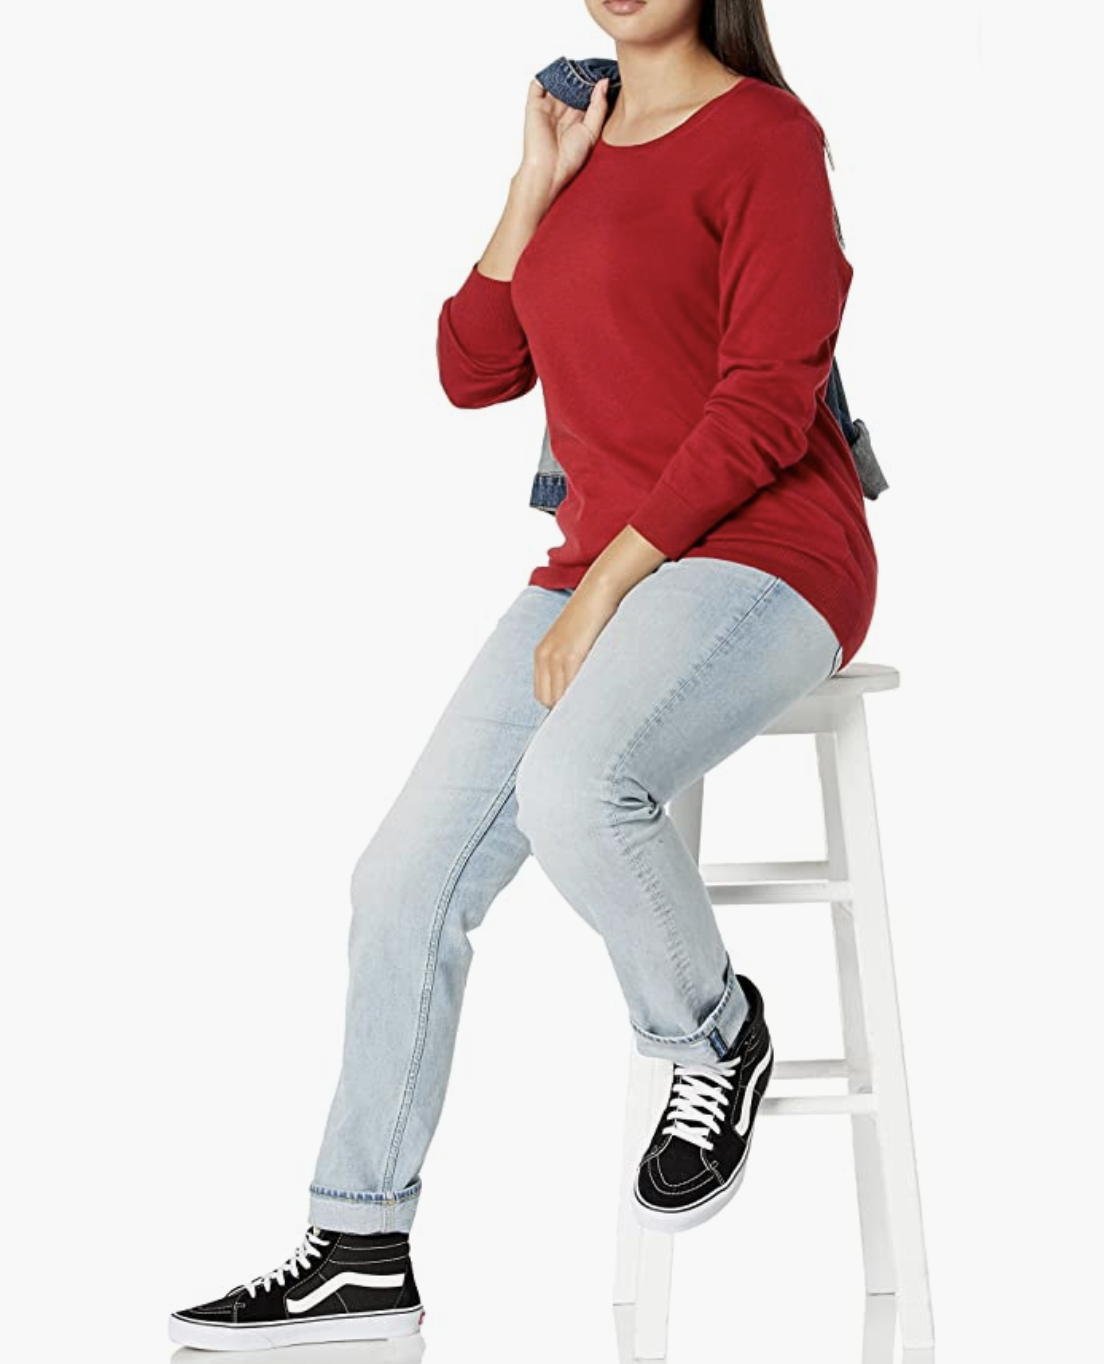 a person wearing the sweater with jeans while sitting on a stool